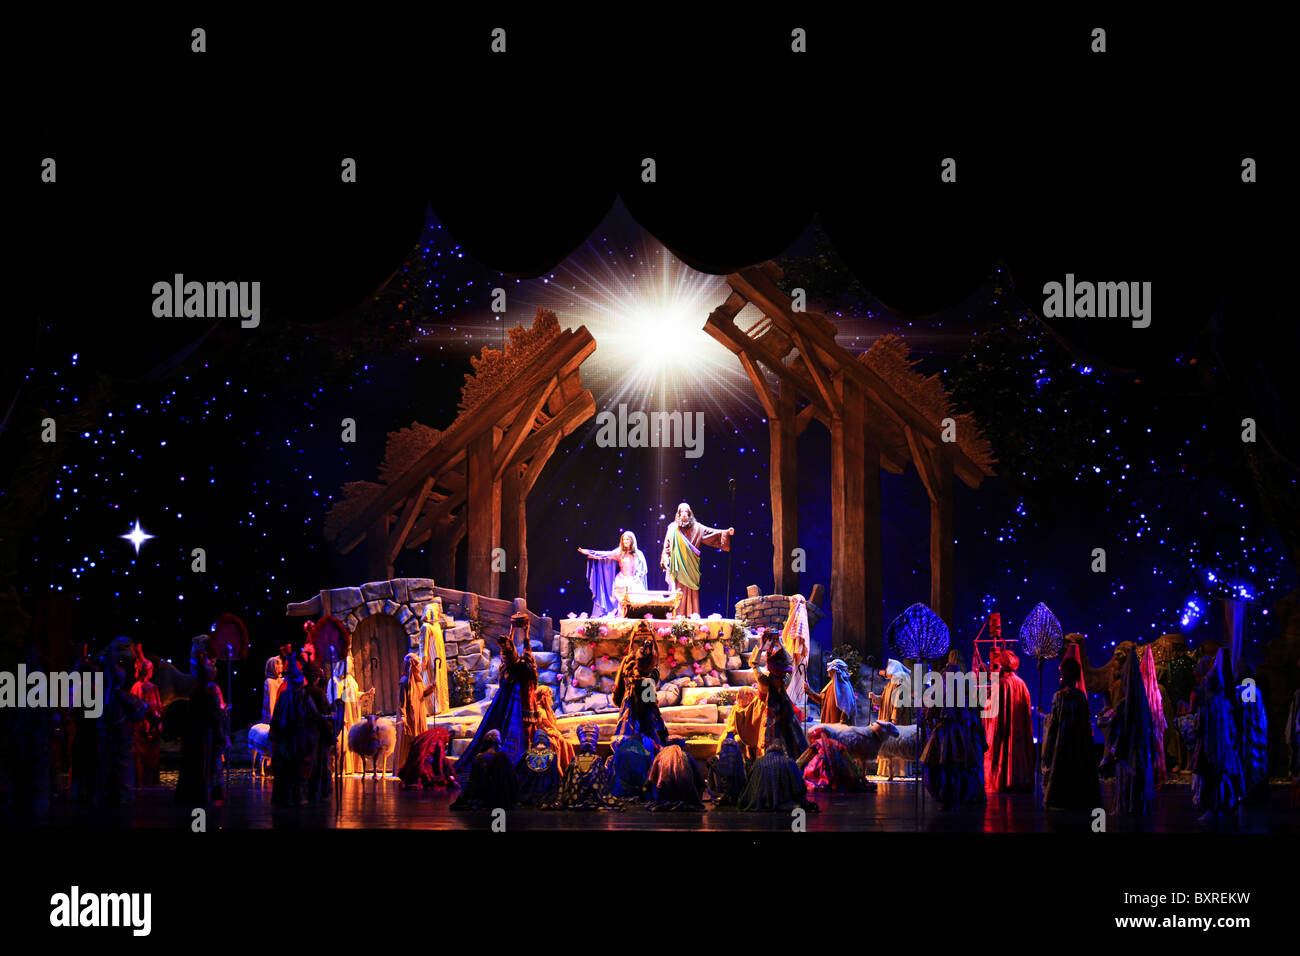 "The living nativity" scene during Radio city music hall Christmas spectacular show in New York city 2010 Stock Photo